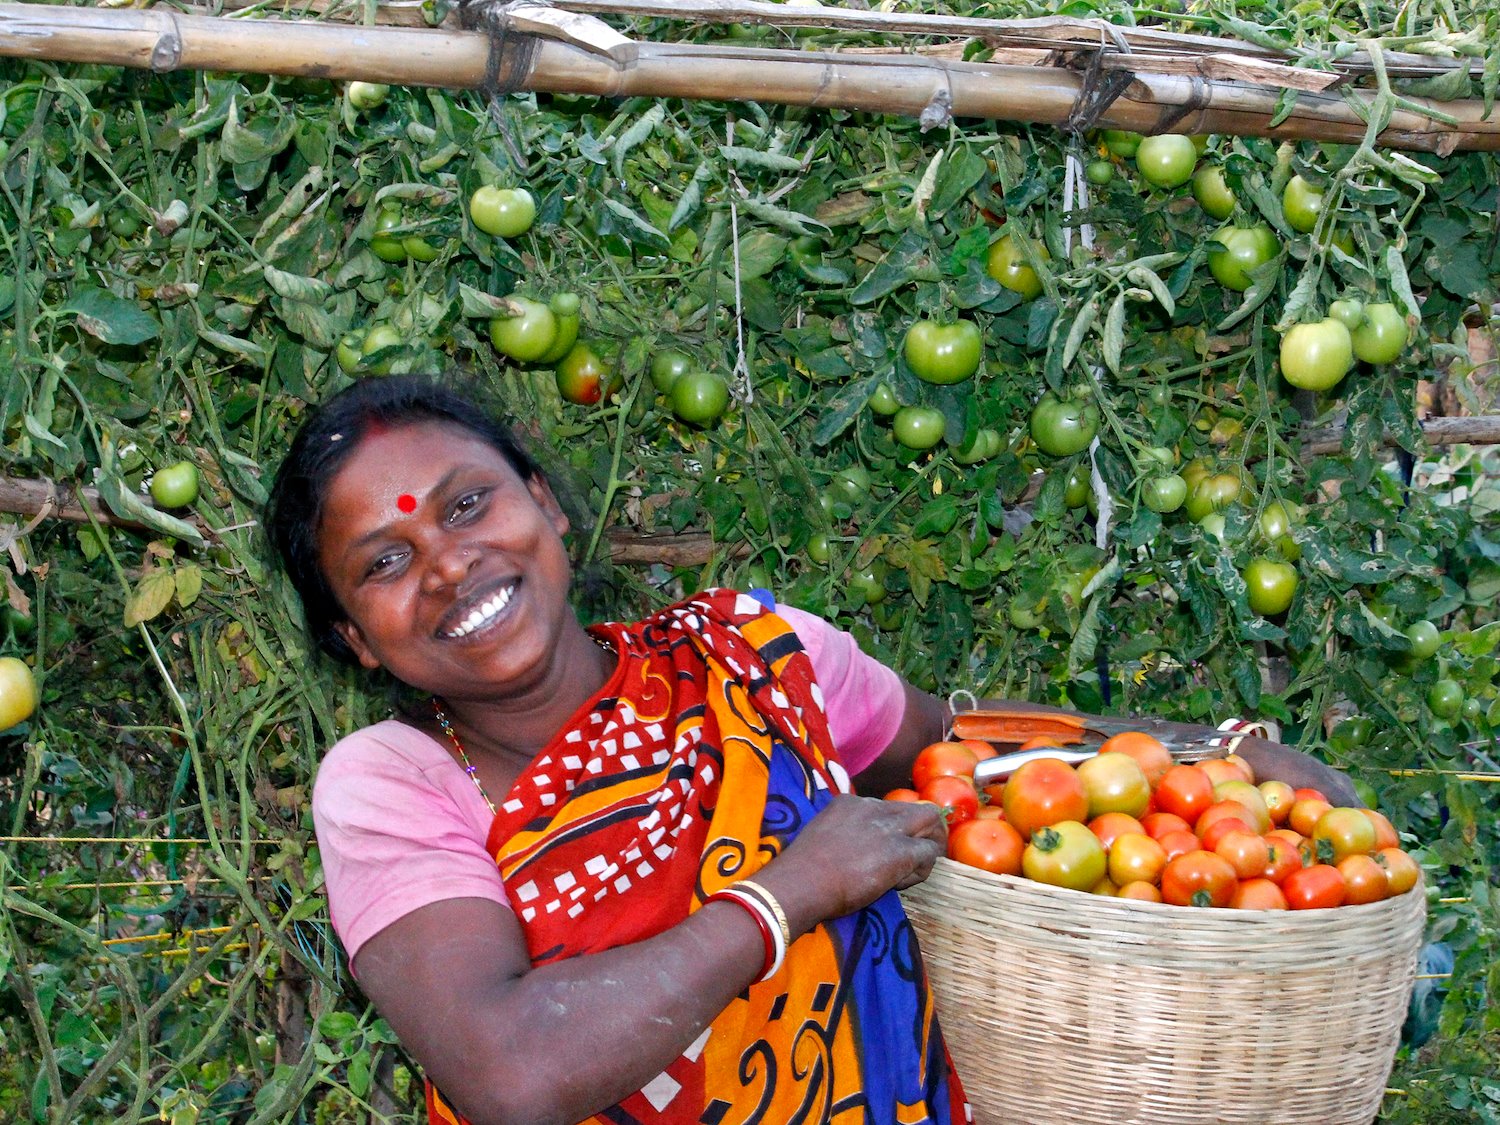 Woman in Indian dress holding basket of tomatoes in front of large tomato vine